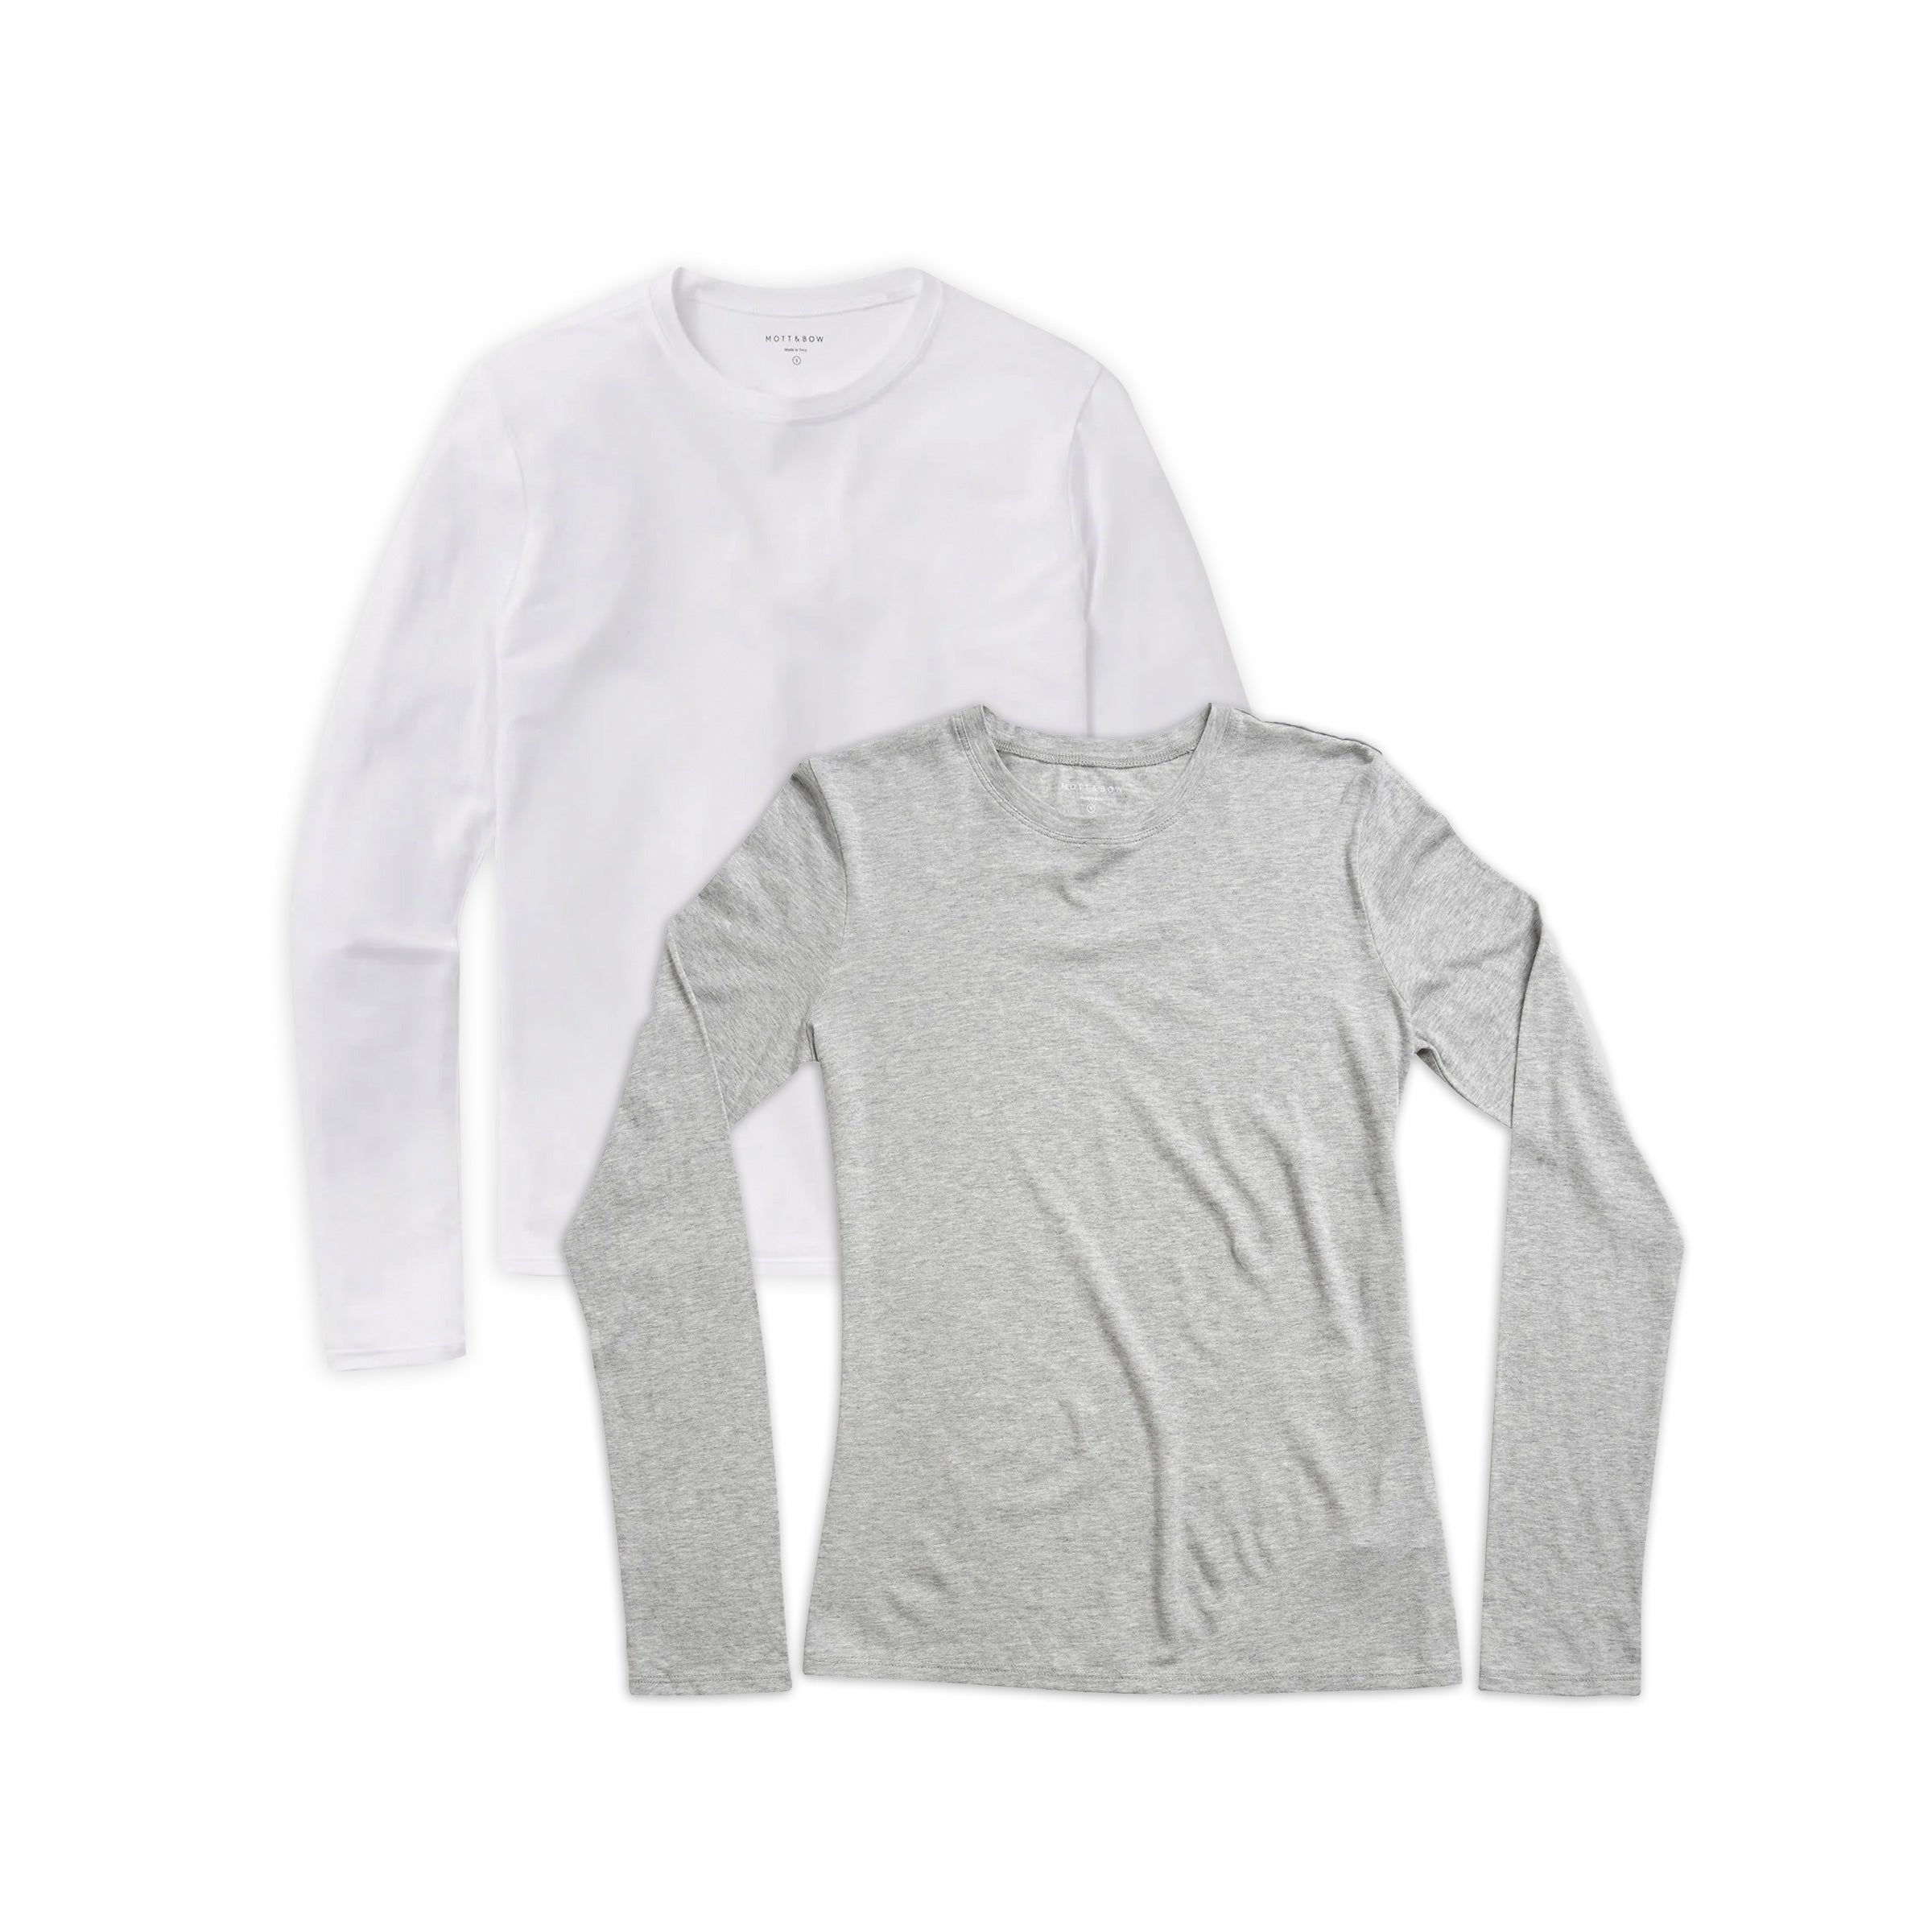  wearing White/Heather Gray Long Sleeve Crew Tee Marcy 2-Pack